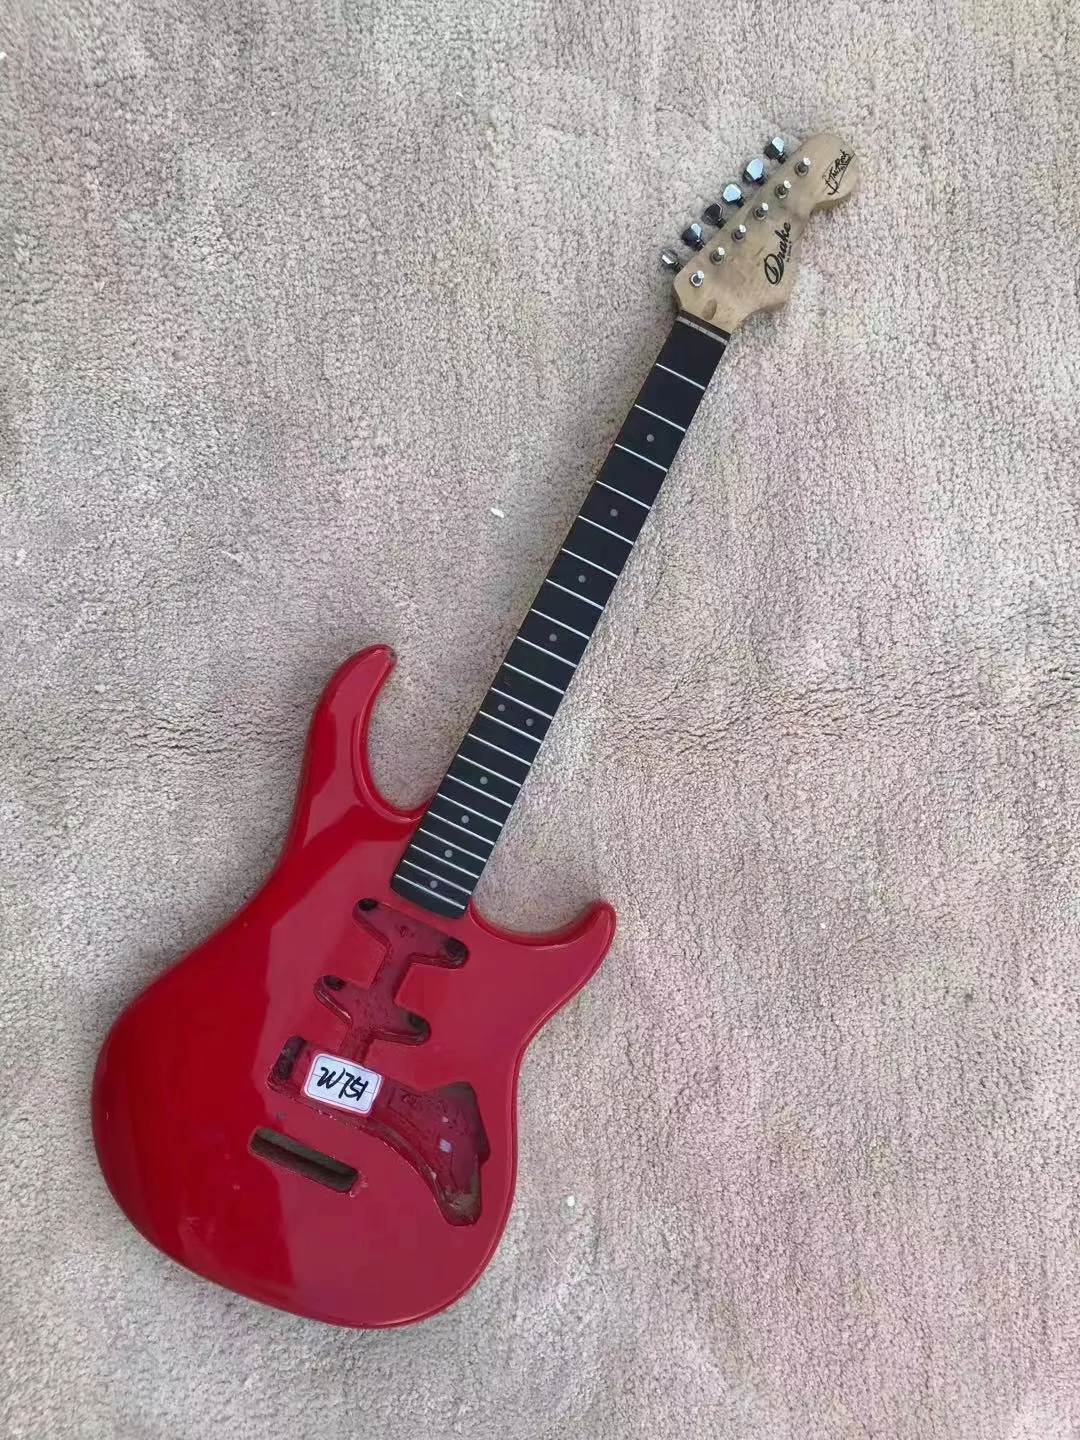 DIY (Not New) Electric Guitar without Hardwares in Stock Discount Free Shipping W751